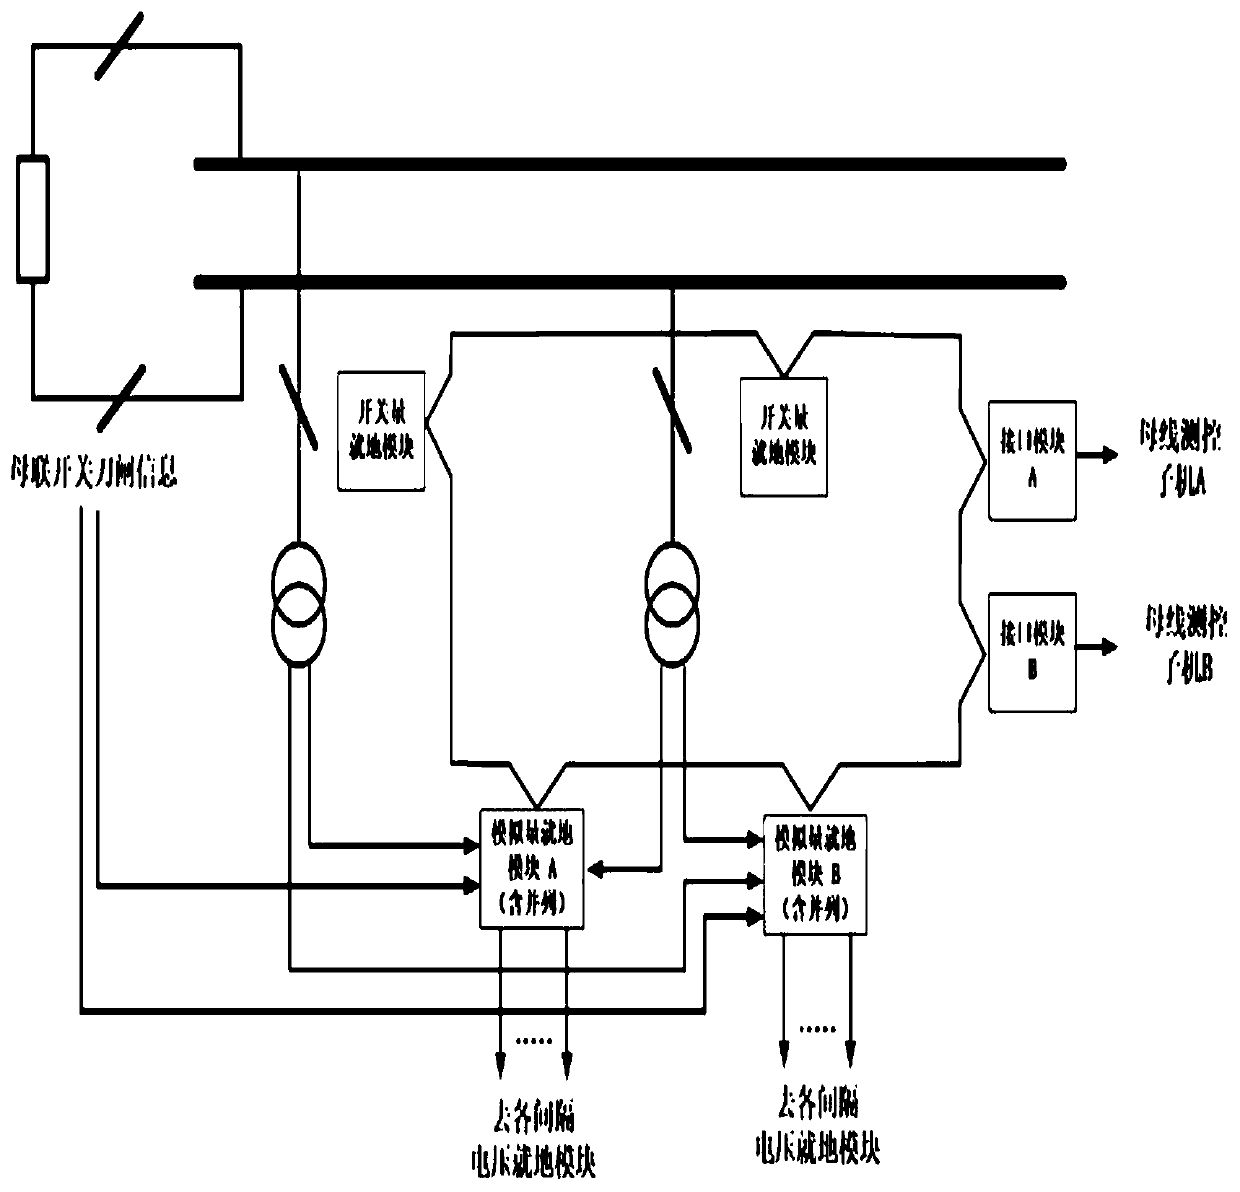 Voltage interactive synchronous sampling method